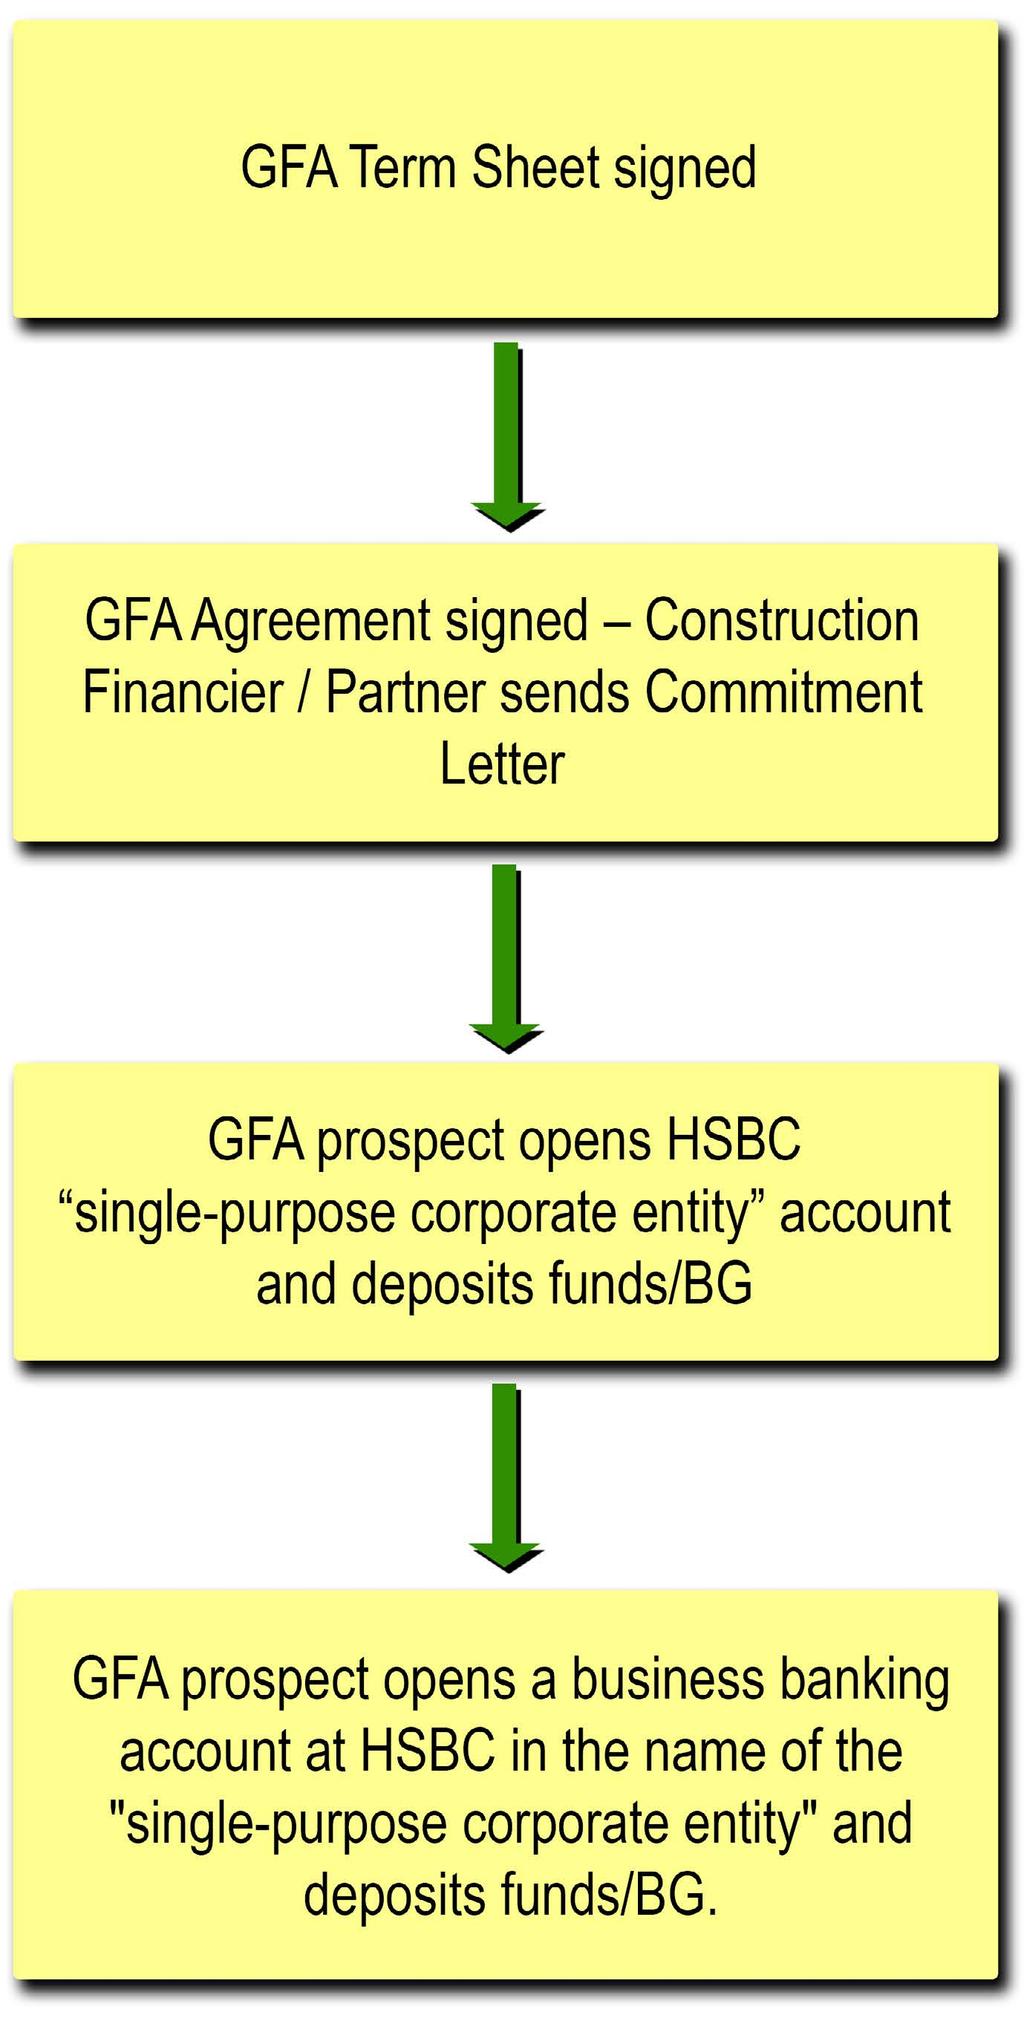 SynSel has partnered with Plant Lender: both share in the plant s success Plant Lender is not a traditional lender GFA: Good Faith Account Traditional Financing GFA Advantage Fuel Platform Second